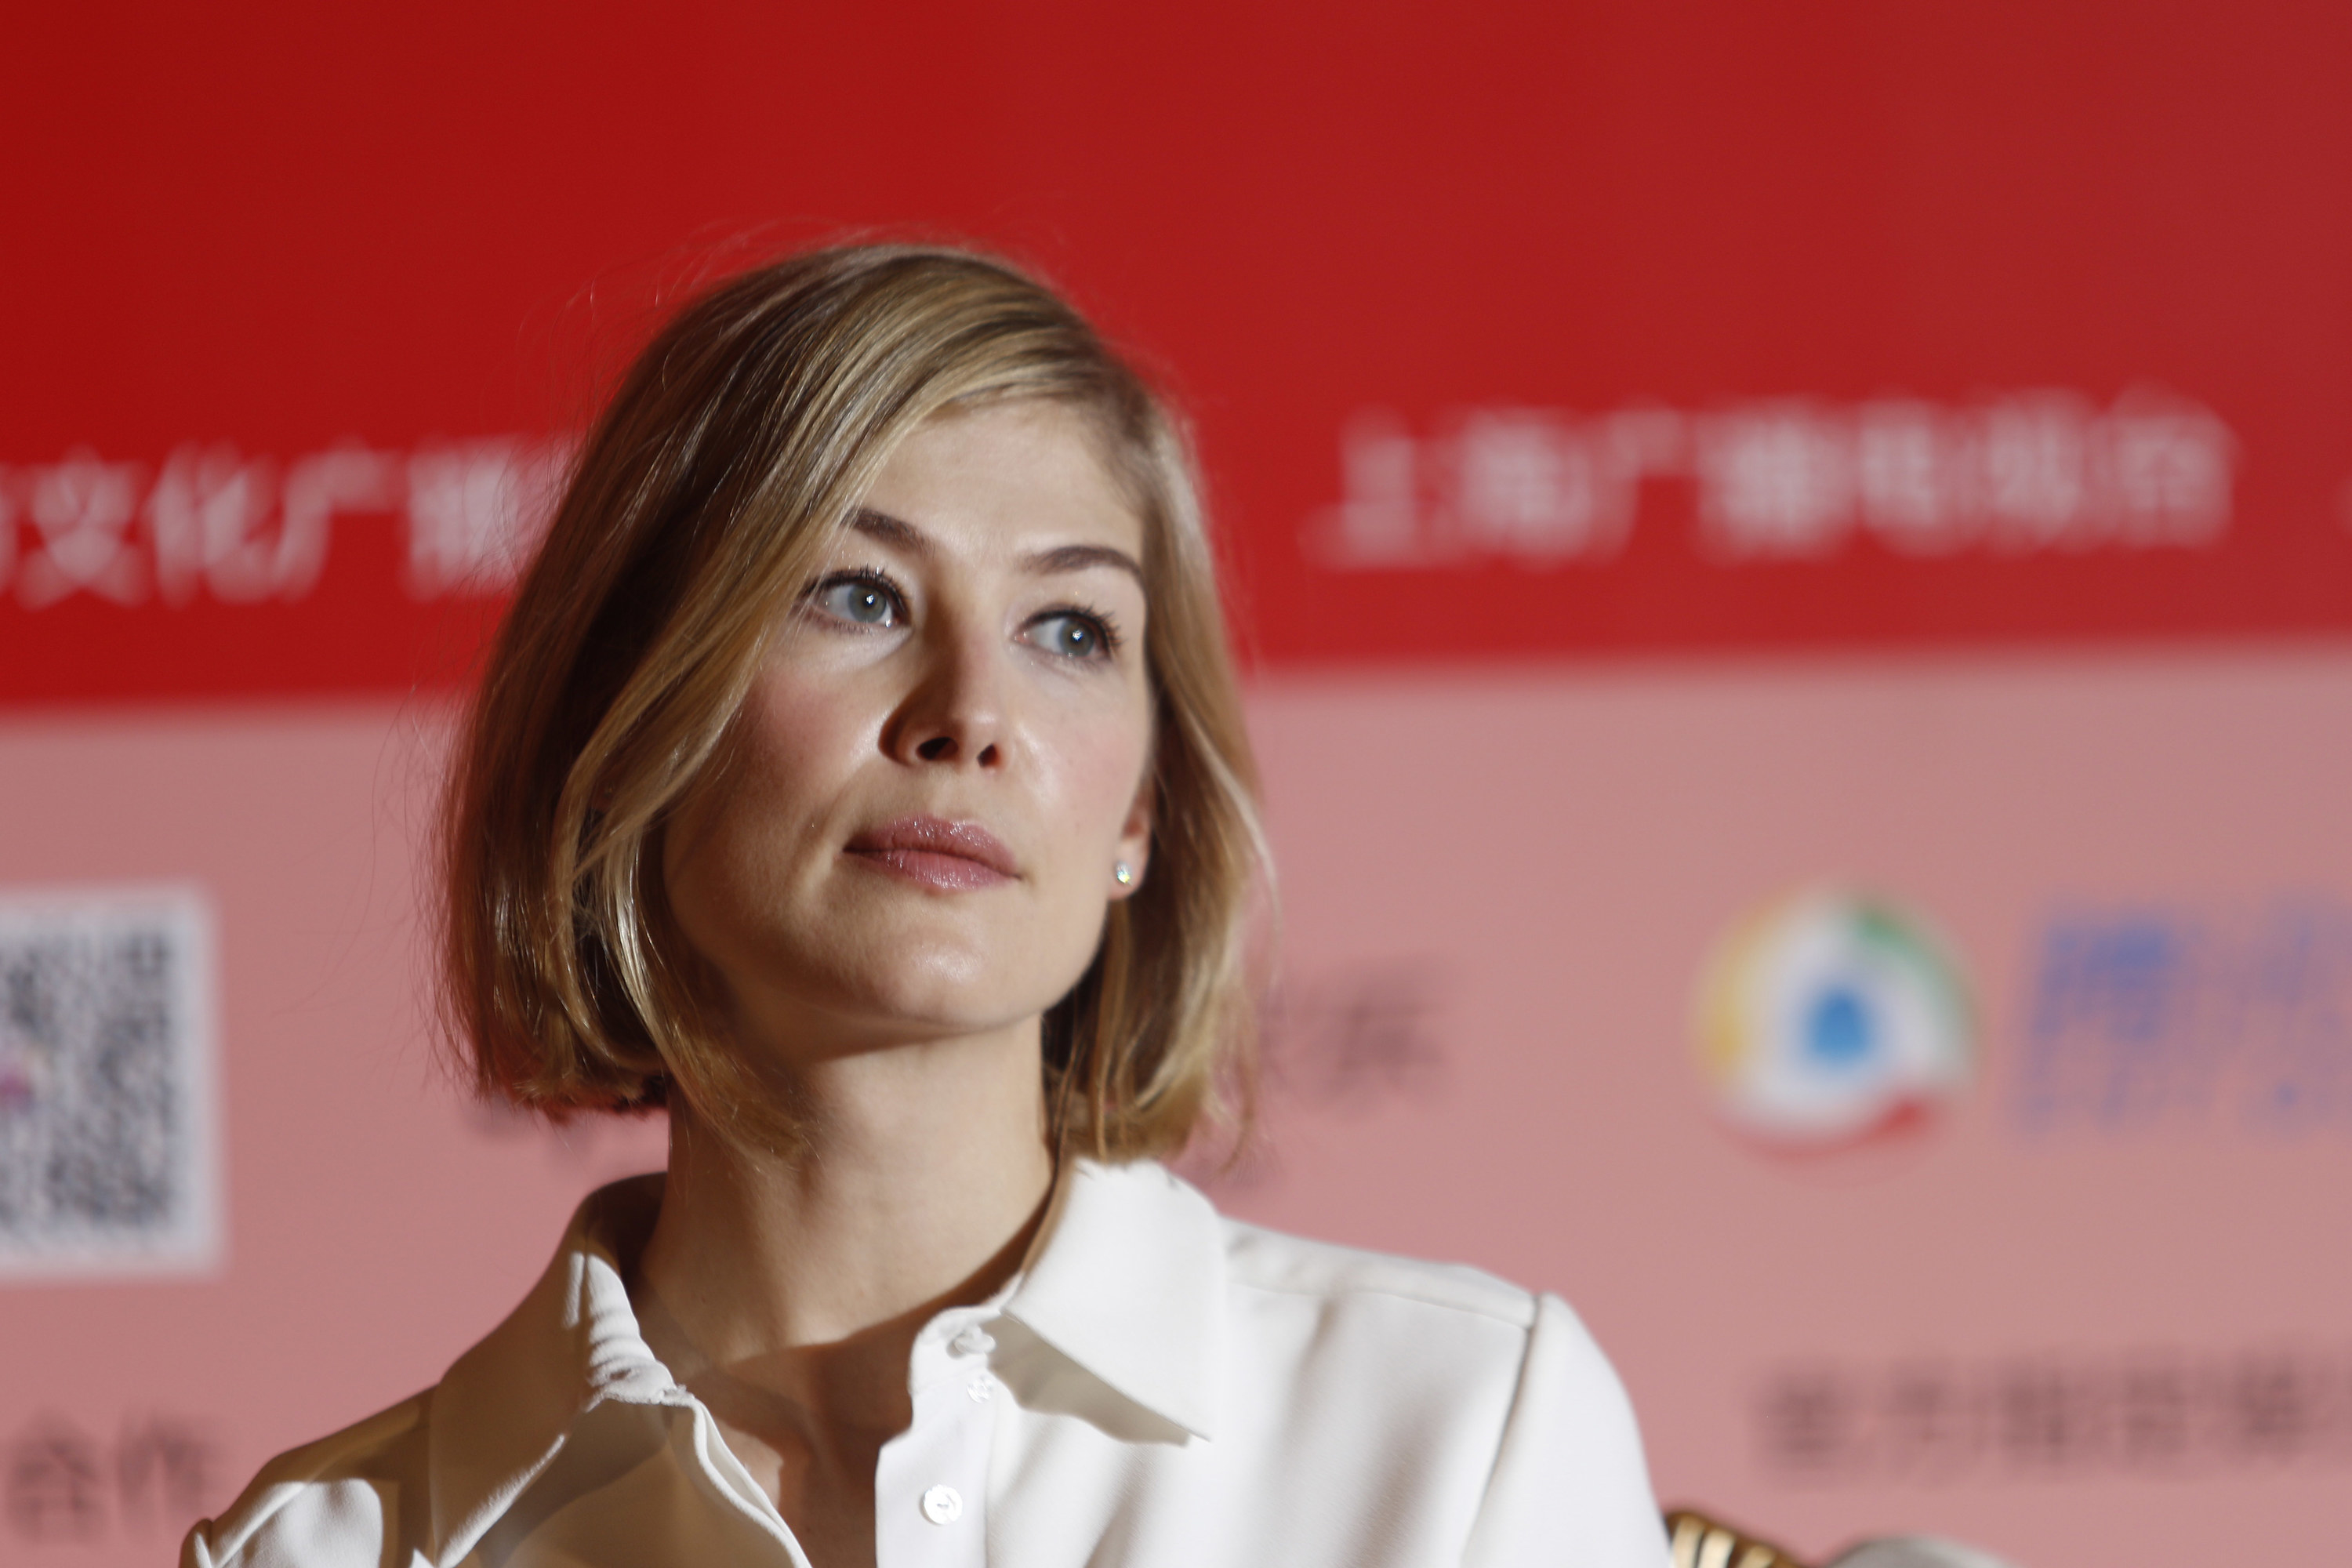 Rosamund Pike at an event for Gone Girl